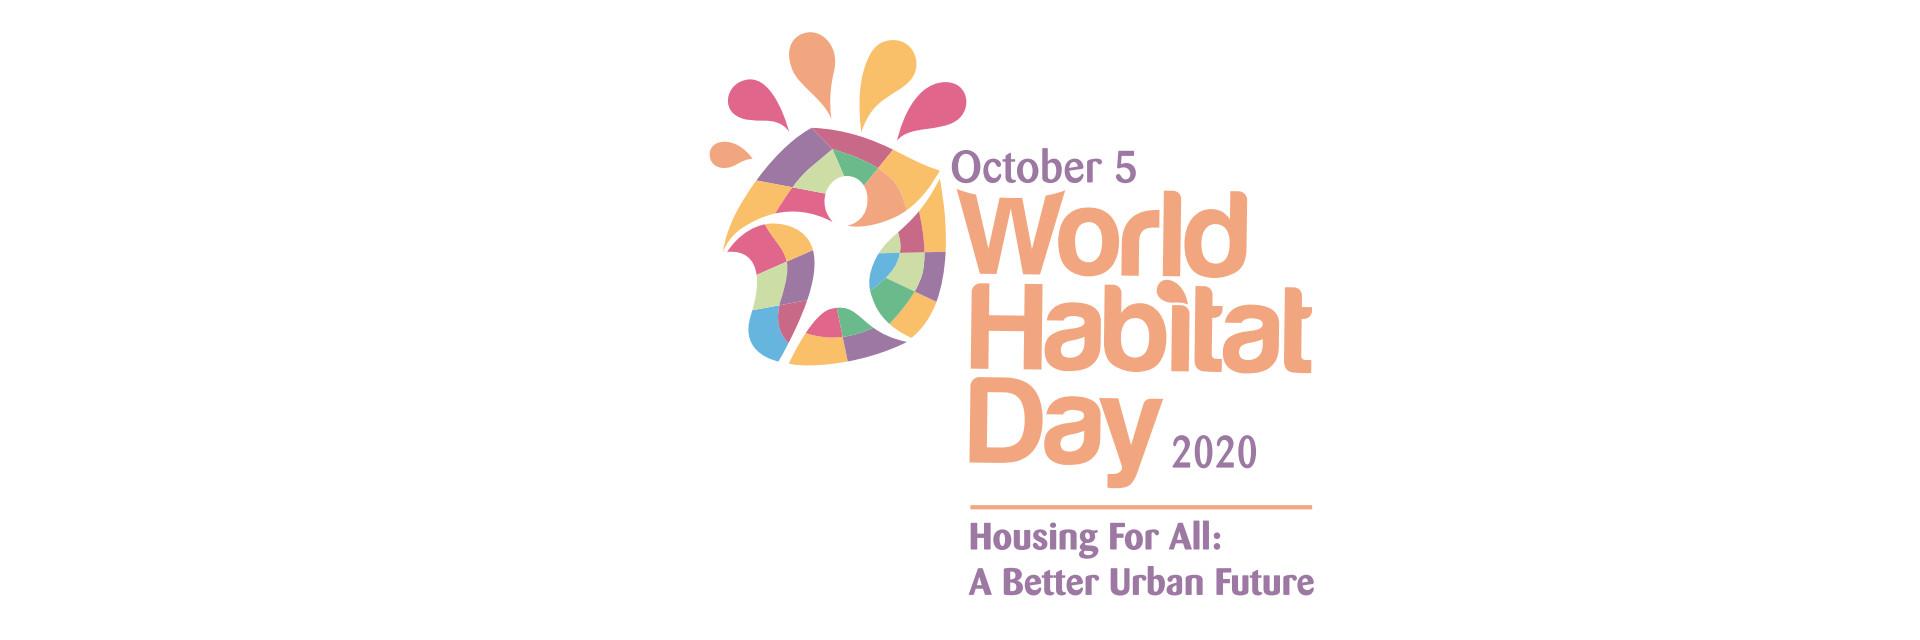 2020 World Habitat Day - Housing For All: A Better Urban Future